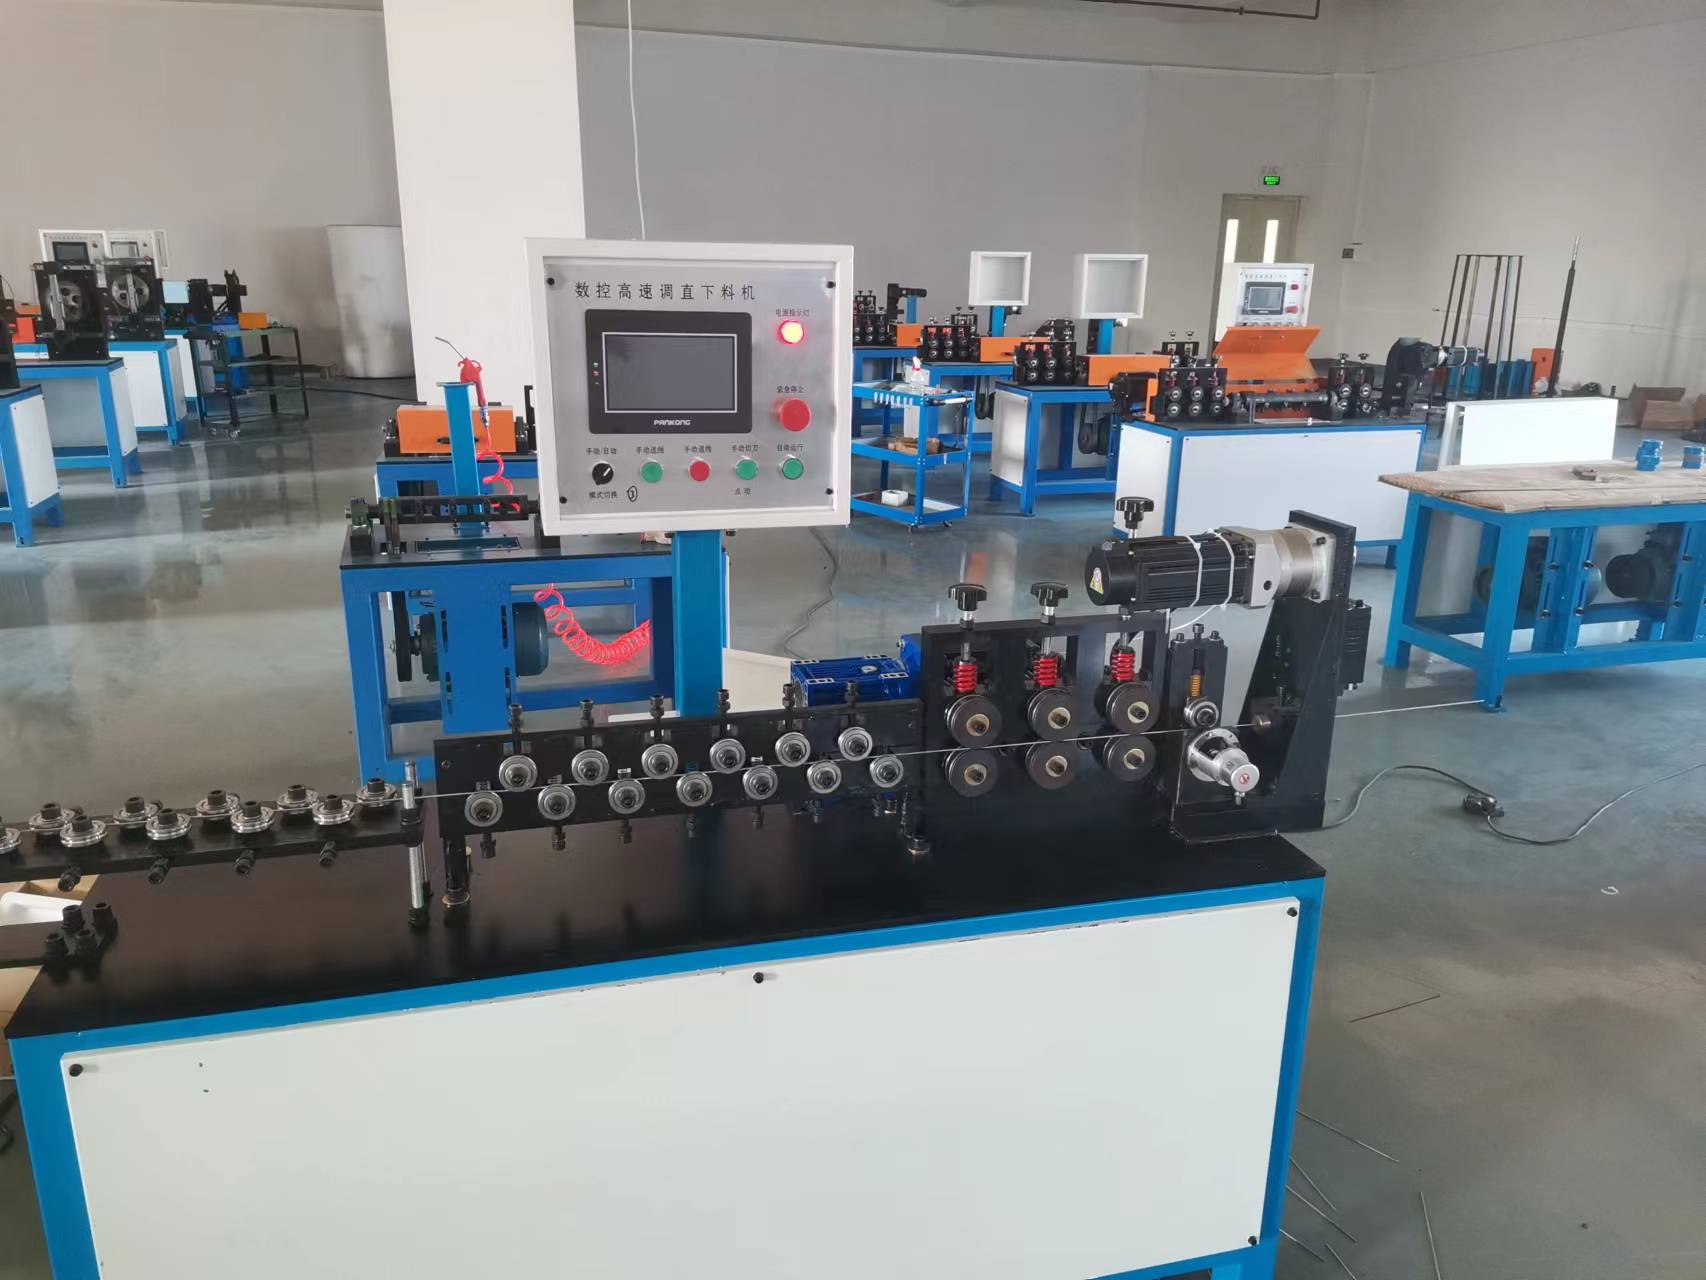 wire straightening cutting 0.5 mm 260 mm cable straightener and cutter fast machines 20-50mm wire rod cutting straightening machine tool